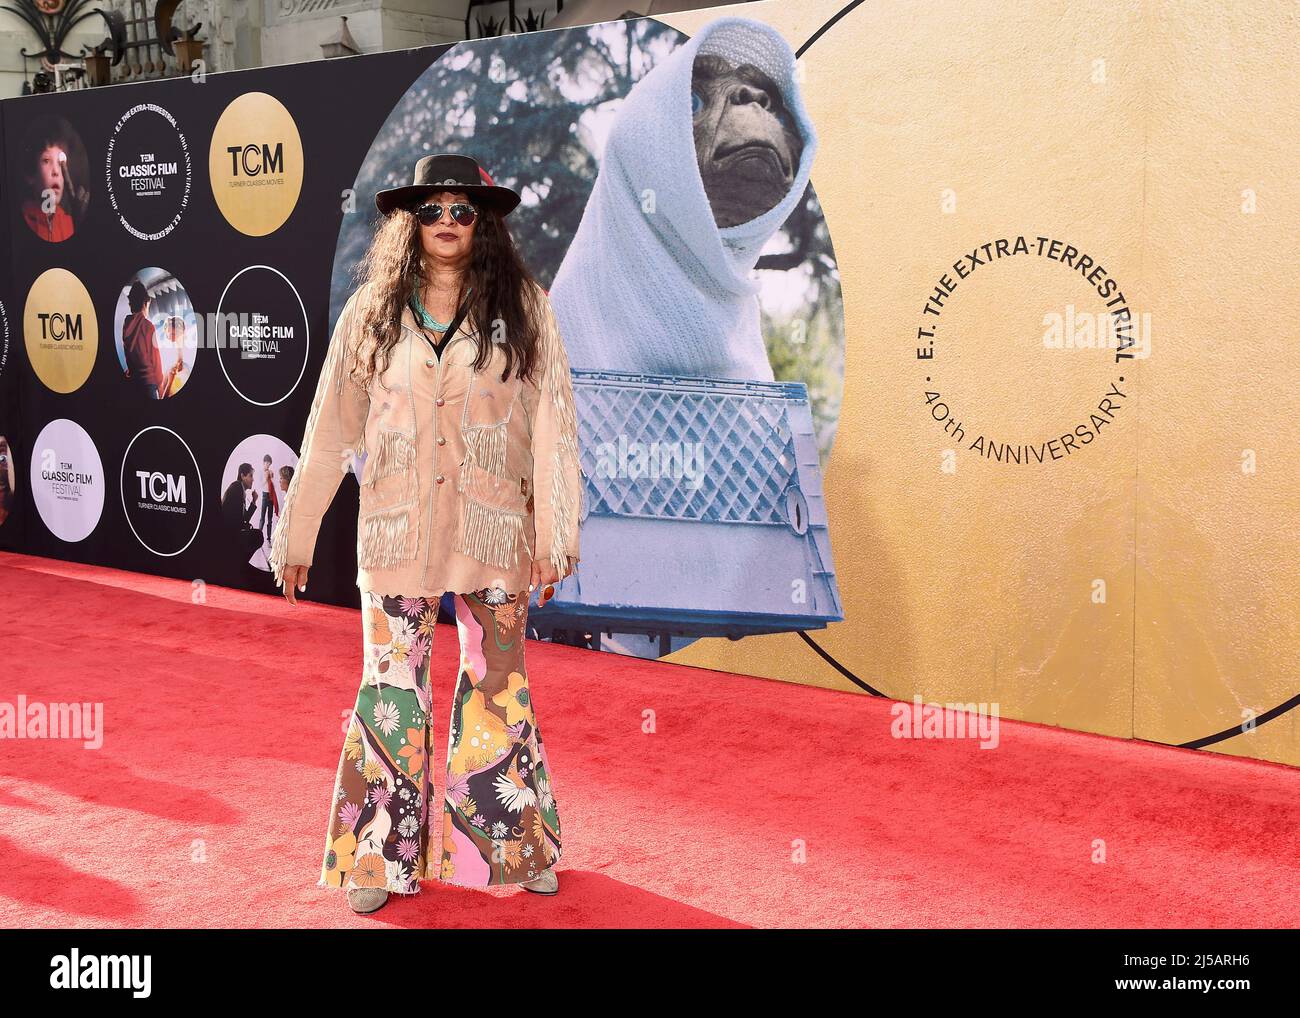 Los Angeles, USA. 21st Apr, 2022. Pam Grier walking on the red carpet at the 2022 TCM Classic Film Festival - 40th Anniversary Screening of 'E.T., the Extra-Terrestrial' at the TCL Chinese Theater in Los Angeles, CA on April 21, 2022. (Photo By Scott Kirkland/Sipa USA) Credit: Sipa USA/Alamy Live News Stock Photo